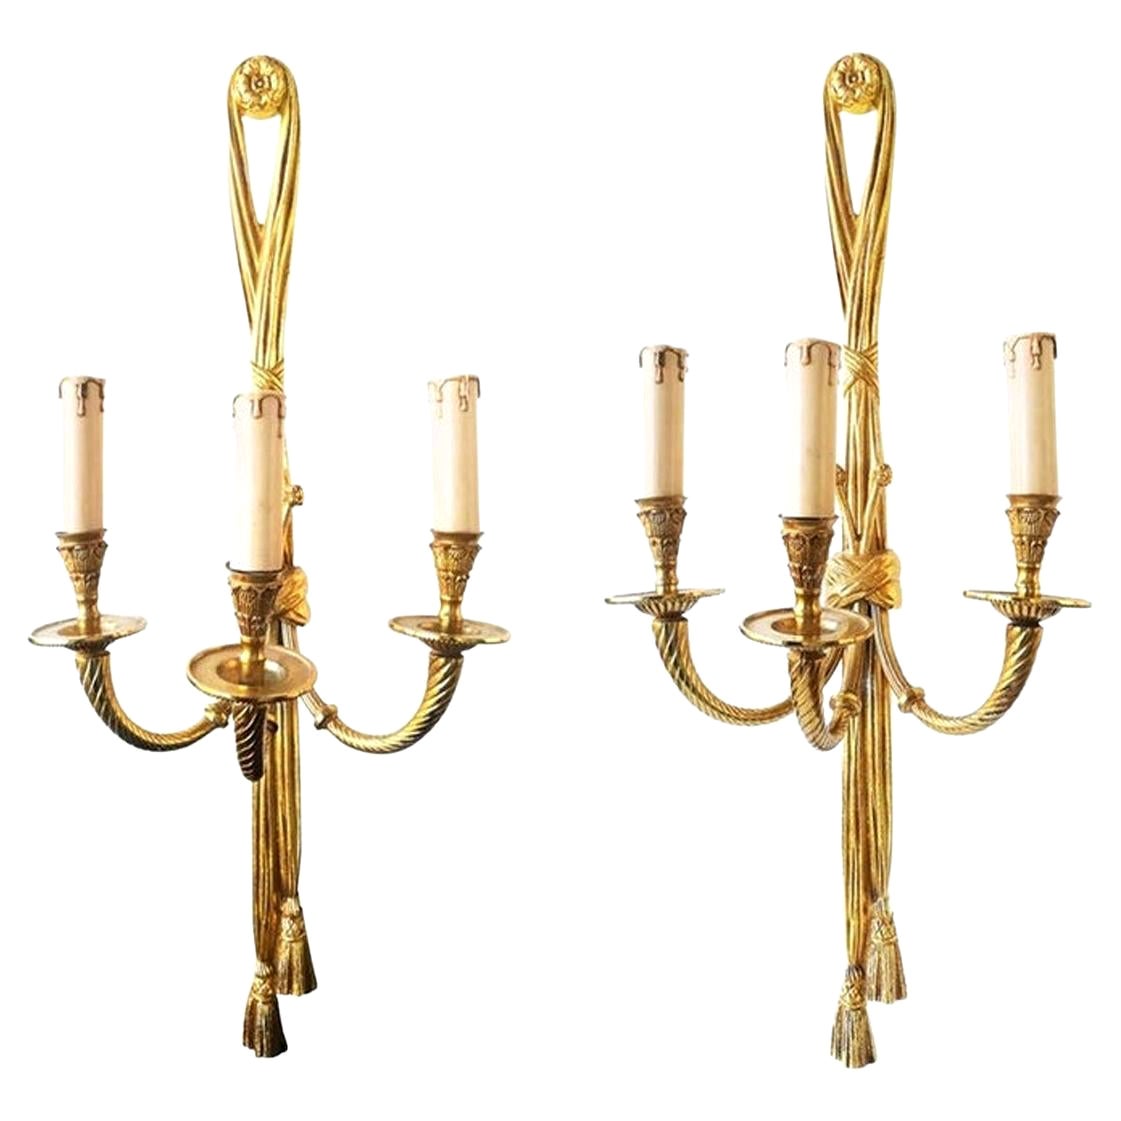  Pair of Wall Sconces Wall Lamp French Louis XVI Style 20th Century For Sale